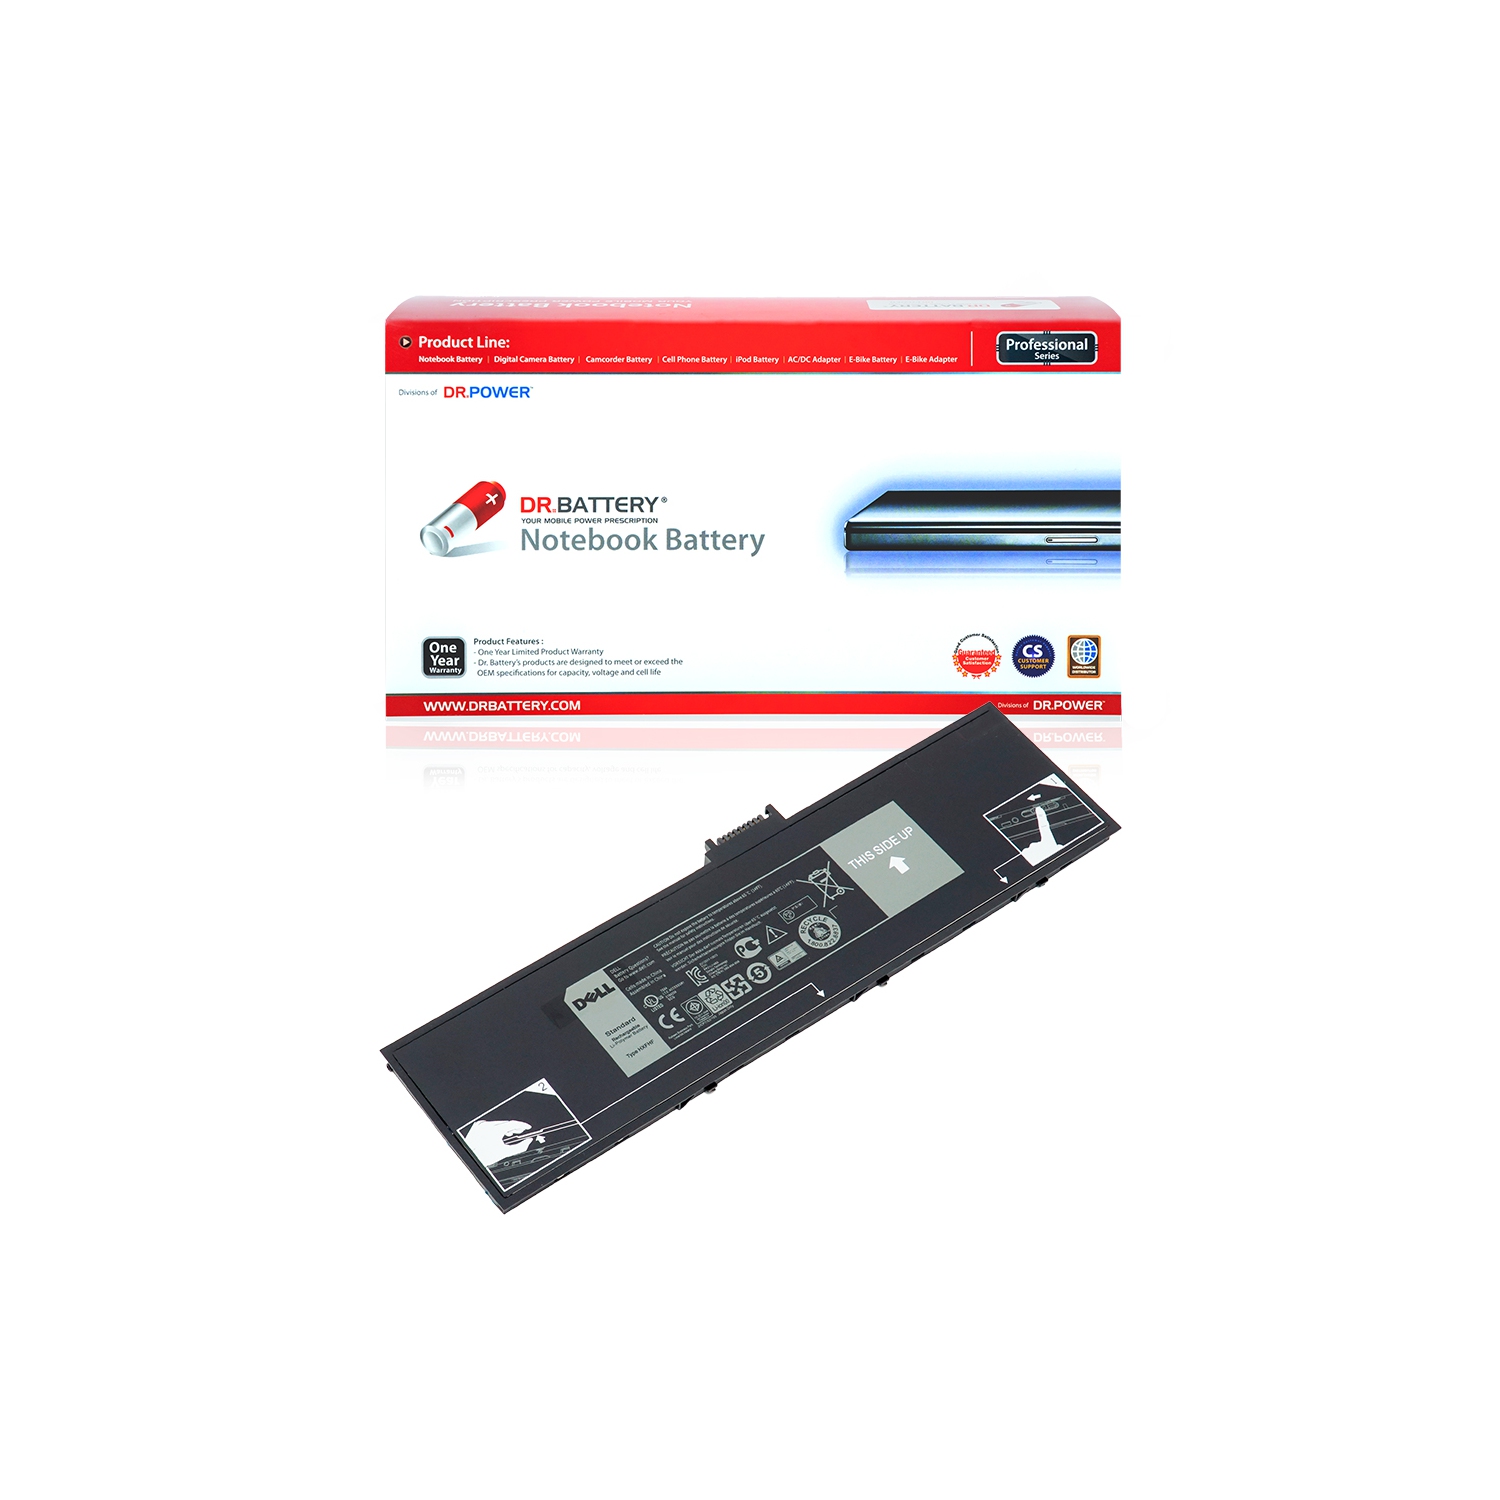 DR. BATTERY - Replacement for Dell Venue 11 Pro (7130) / 11 Pro (7139) / 11 Pro 7130 / 11 Pro 7139 / 0VJF0X / 0VT26R / HXFHF [7.4V / 4855mAh / 36Wh] ***Free Shipping***